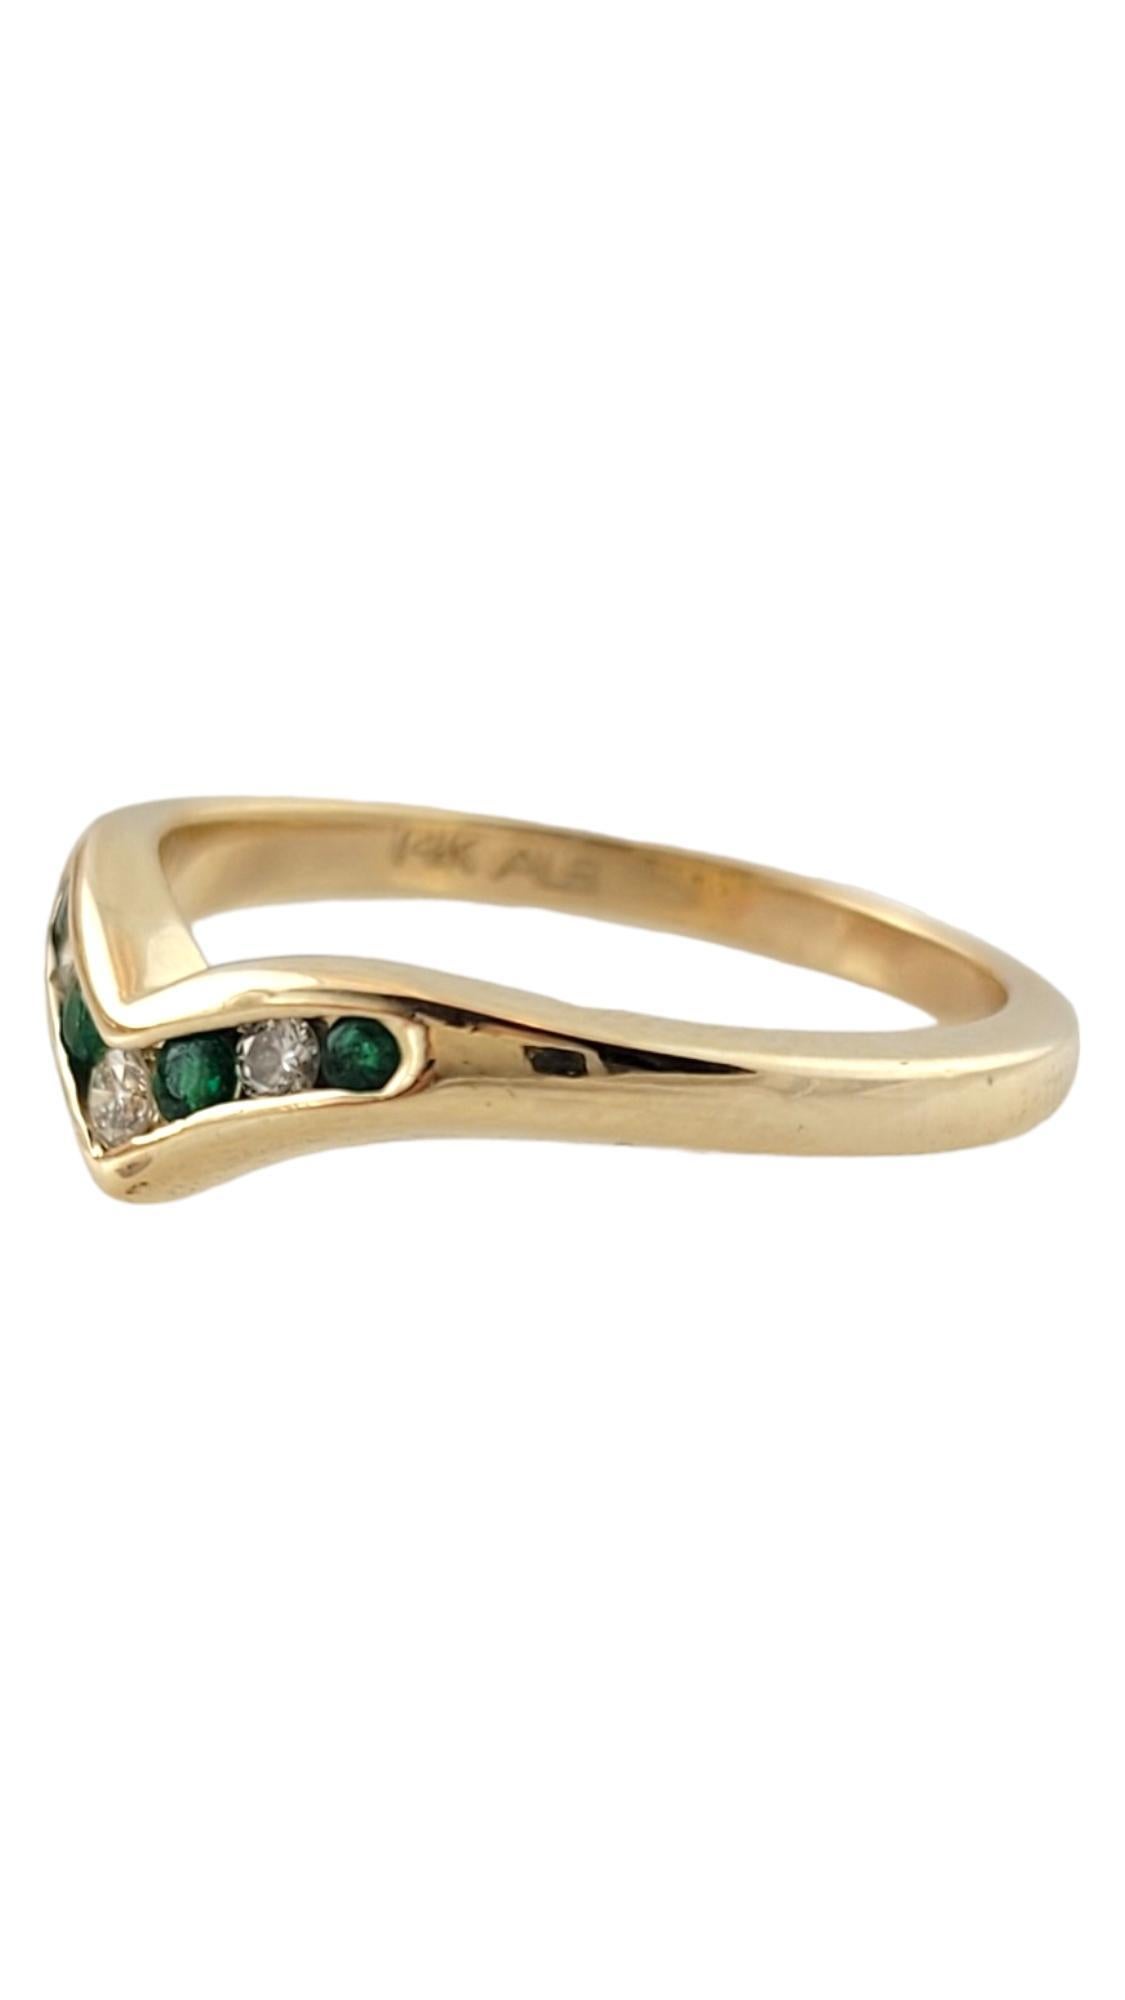 Vintage 14K Yellow Gold Natural Emerald and Diamond Ring Size 6.25

This beautiful 14K gold ring with 4 lab tested natural emeralds and 3 round brilliant cut diamonds is going to look gorgeous on anybody!

Approximate total diamond weight: .05